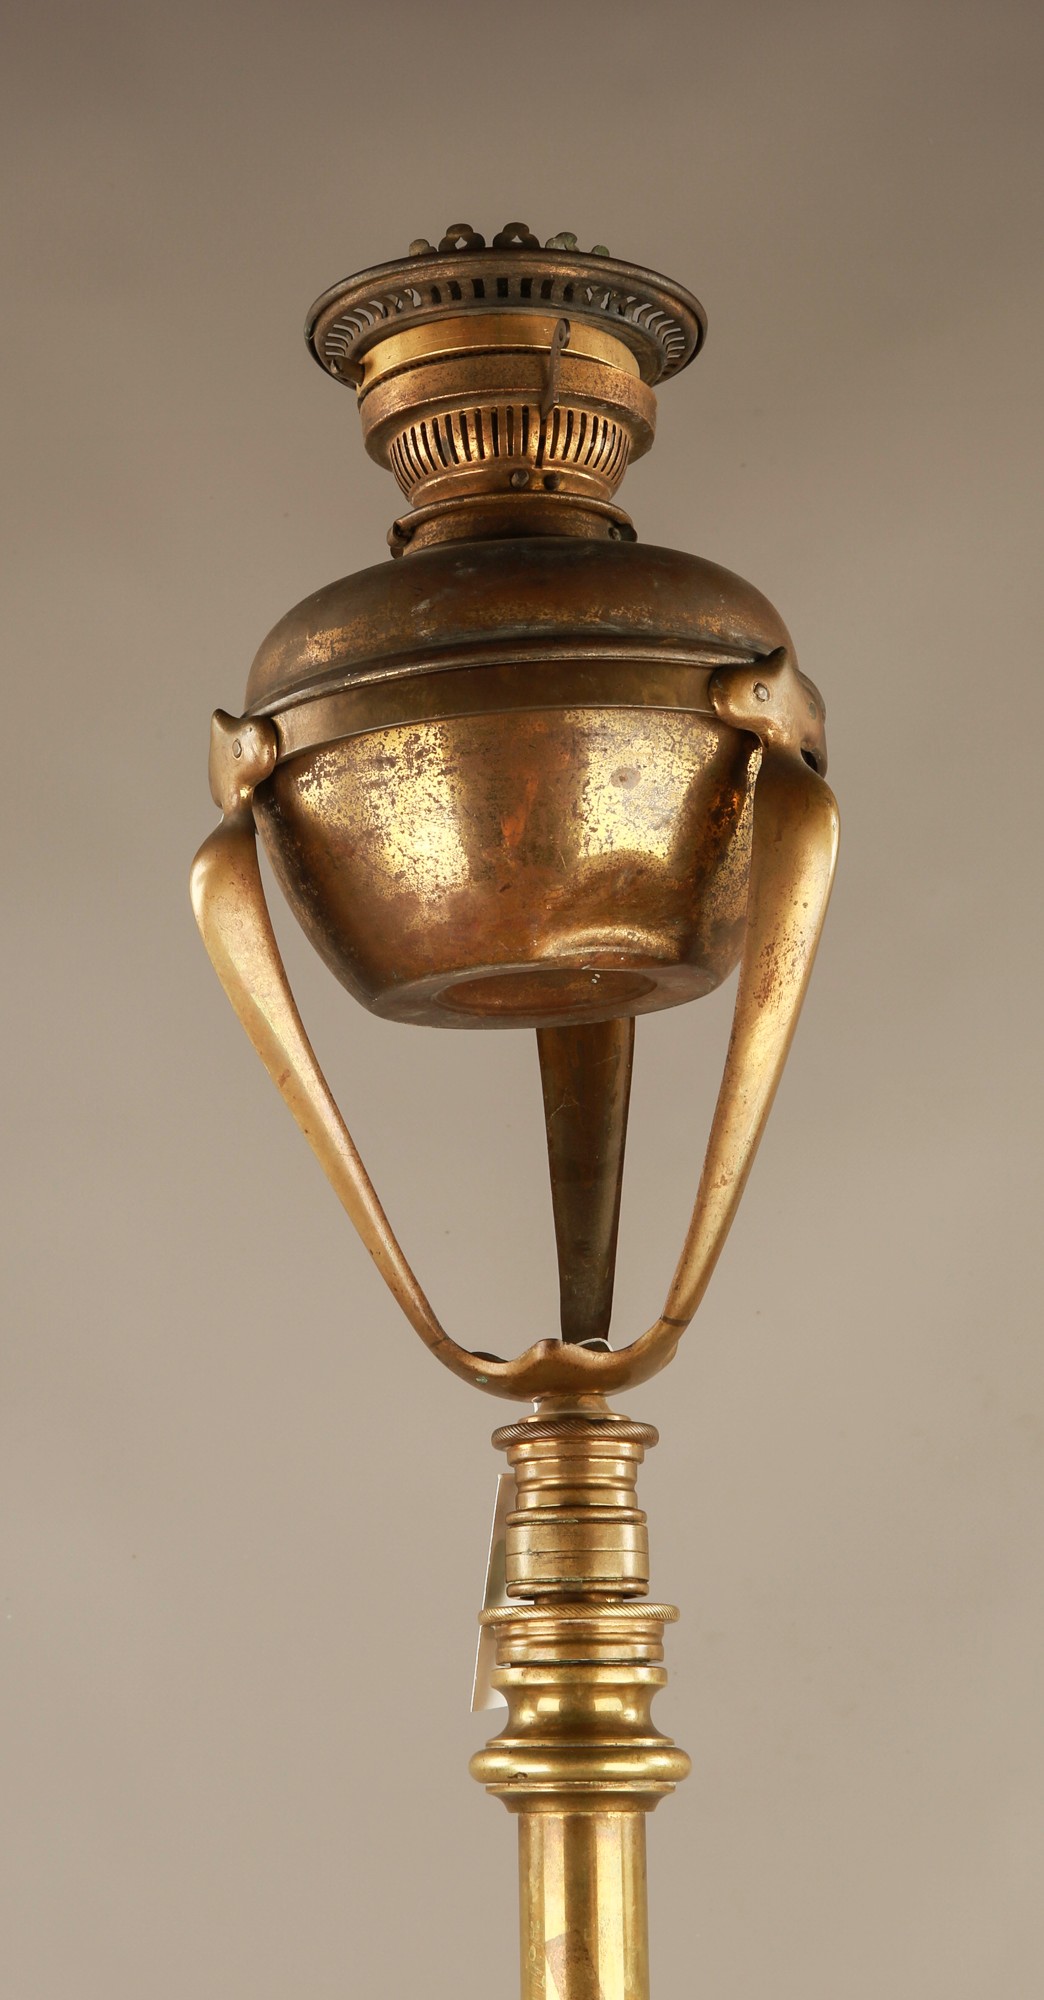 Brass Standing Oil Lamp 140cm tall #127 - Image 2 of 2